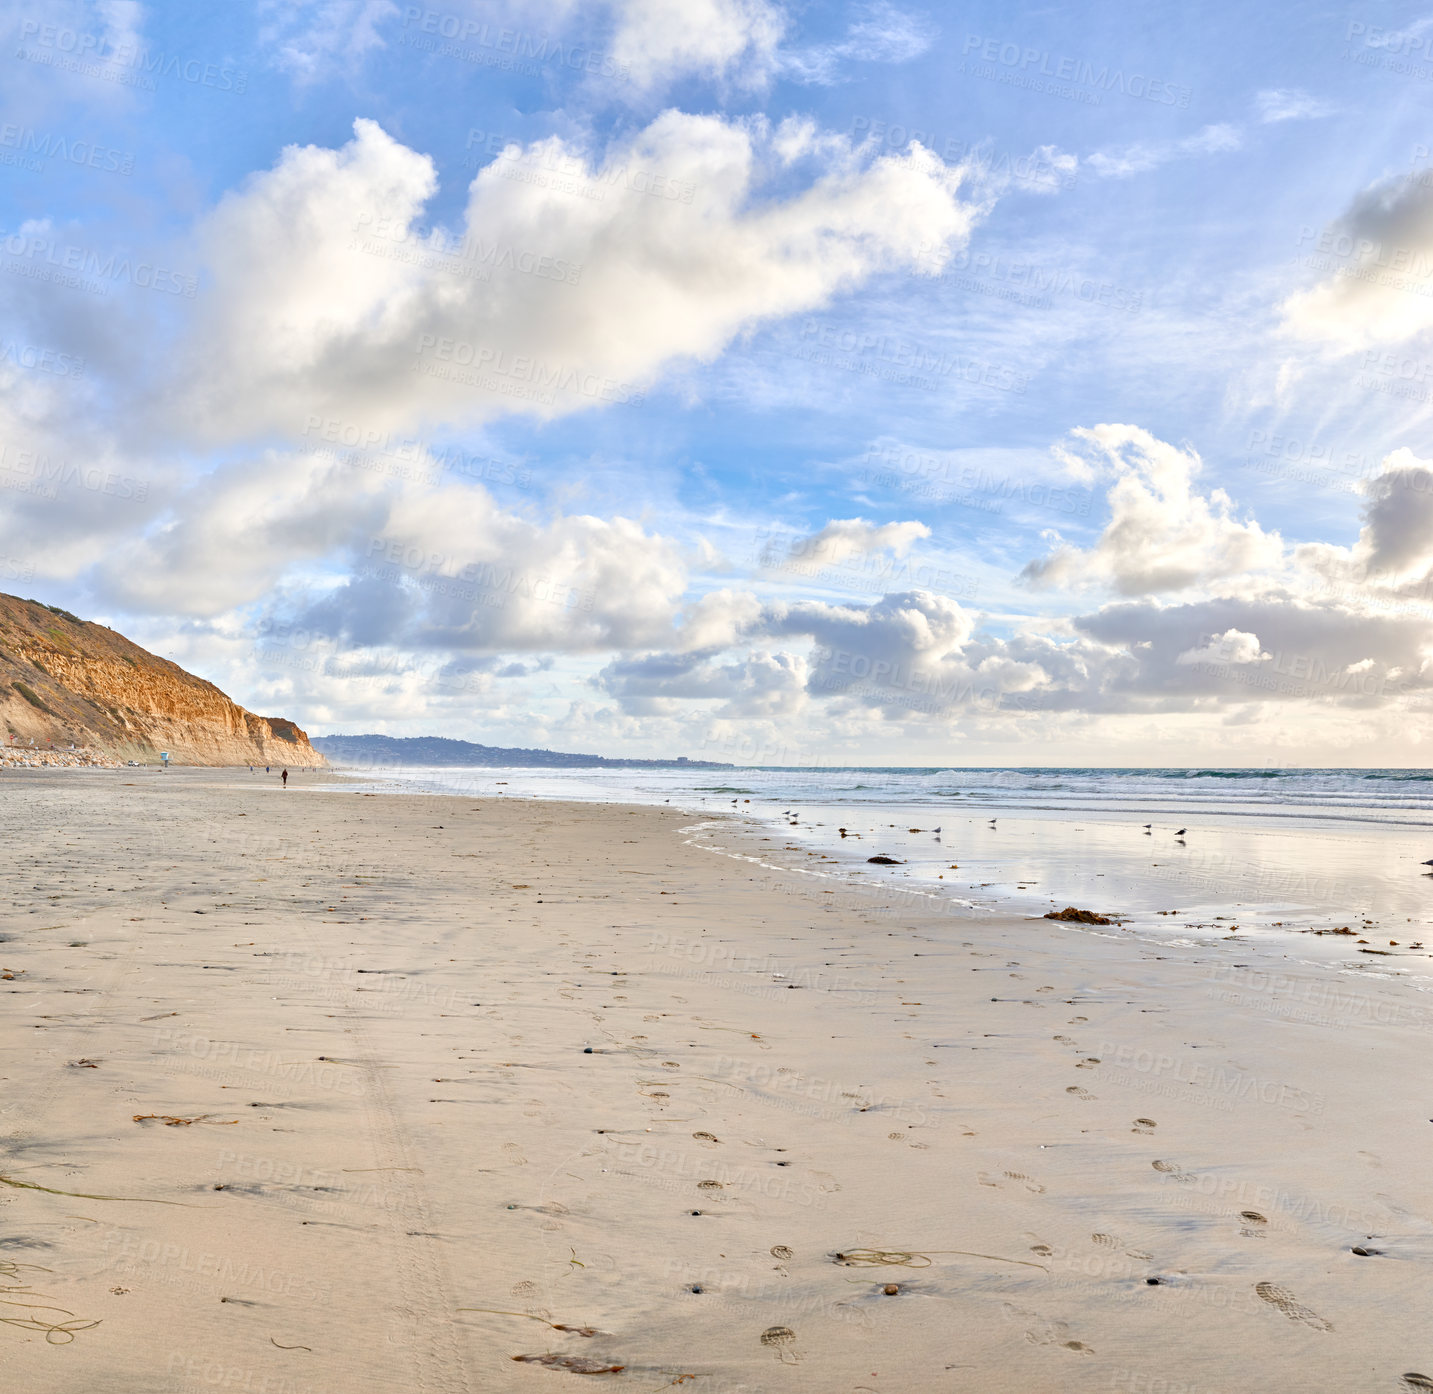 Buy stock photo The beach of Torrey Pines, San Diego, California. Landscape of empty beach showing shoreline. Walkers footprints remain in the sand as the sun starts setting and the clouds come over the sky. 